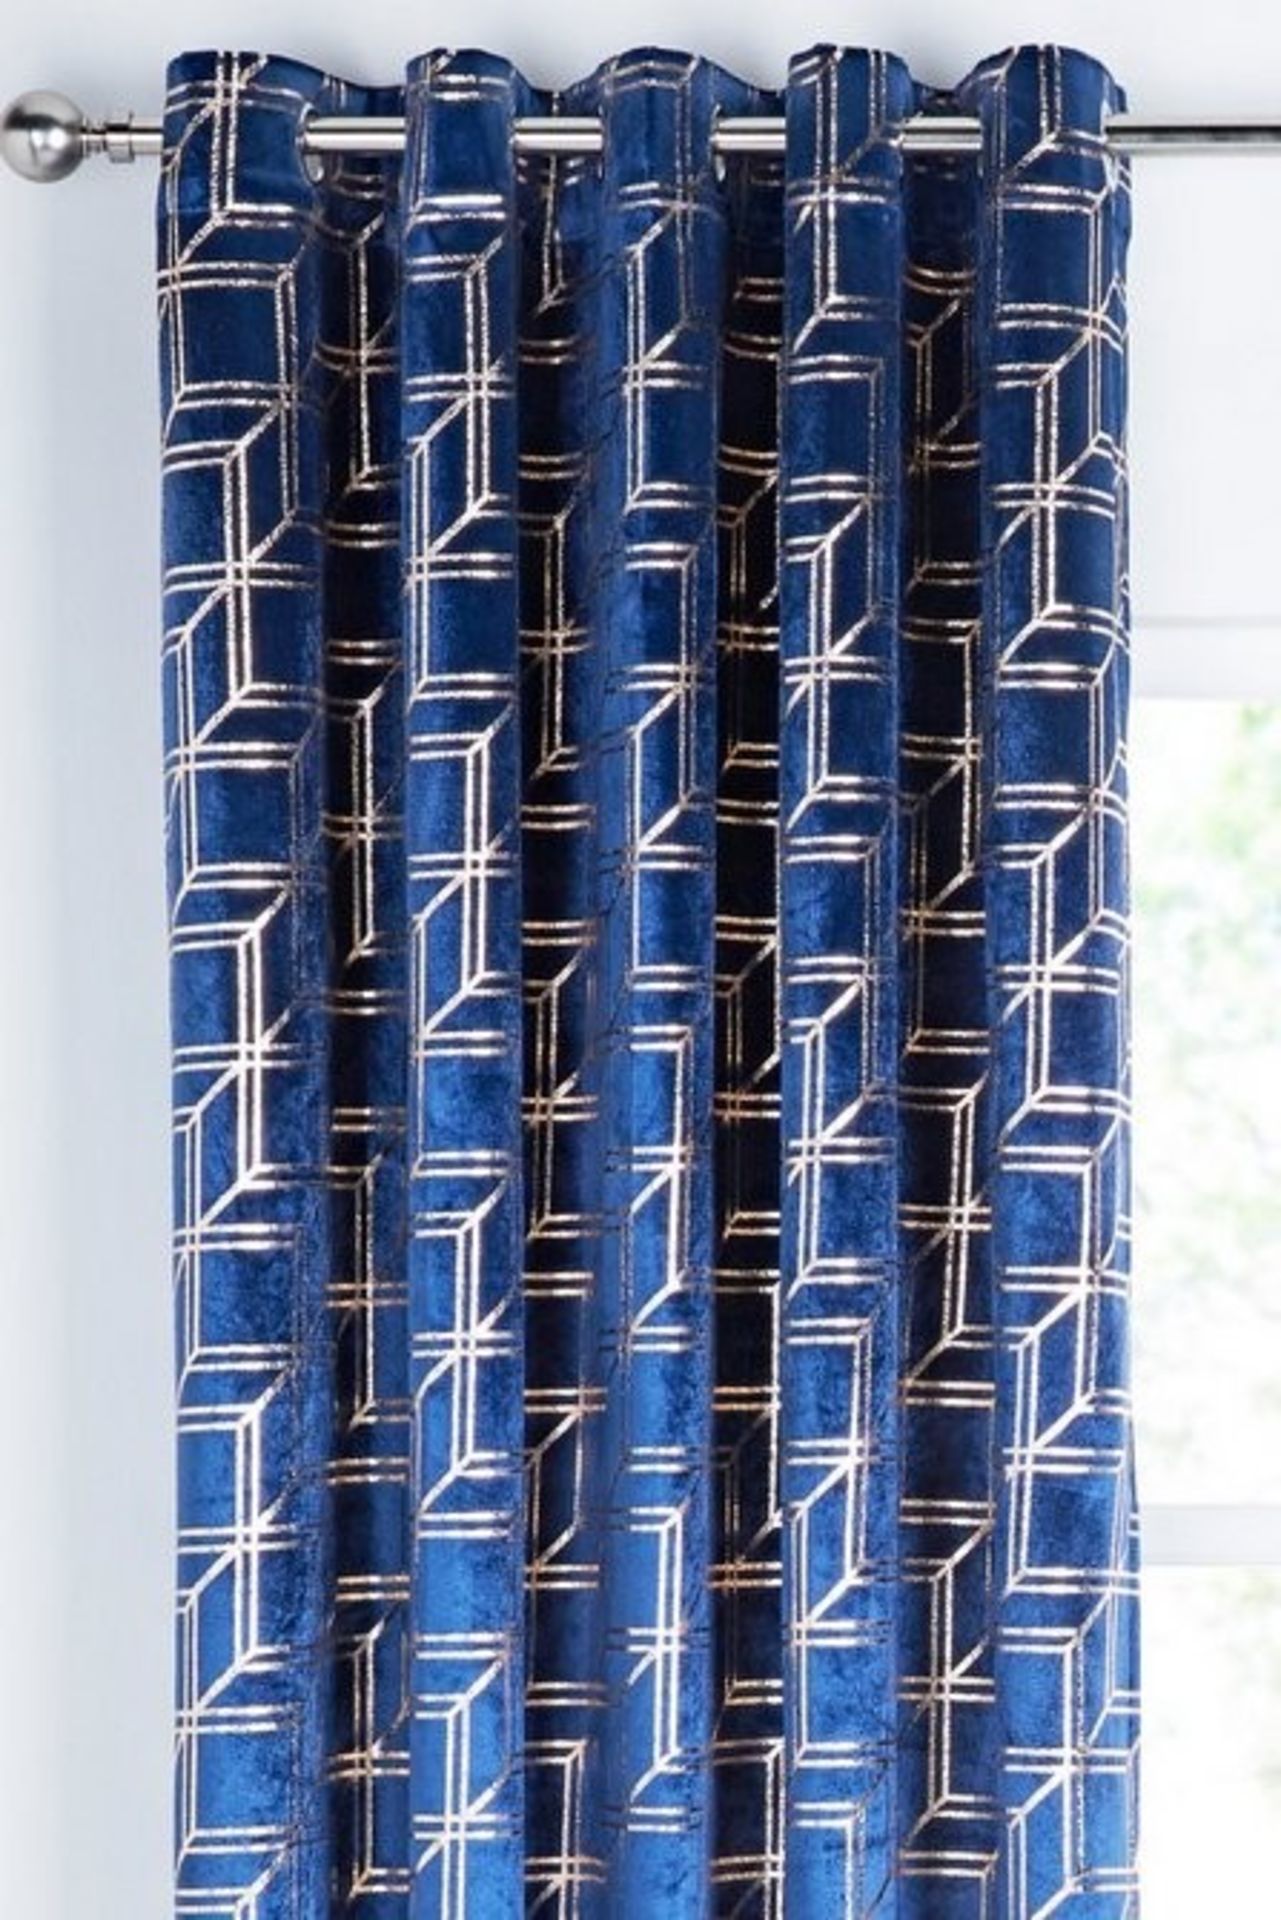 1 BAGGED METALLIC CUBES CURTAINS IN BLUE / SIZE 46 X 54 (PUBLIC VIEWING AVAILABLE)